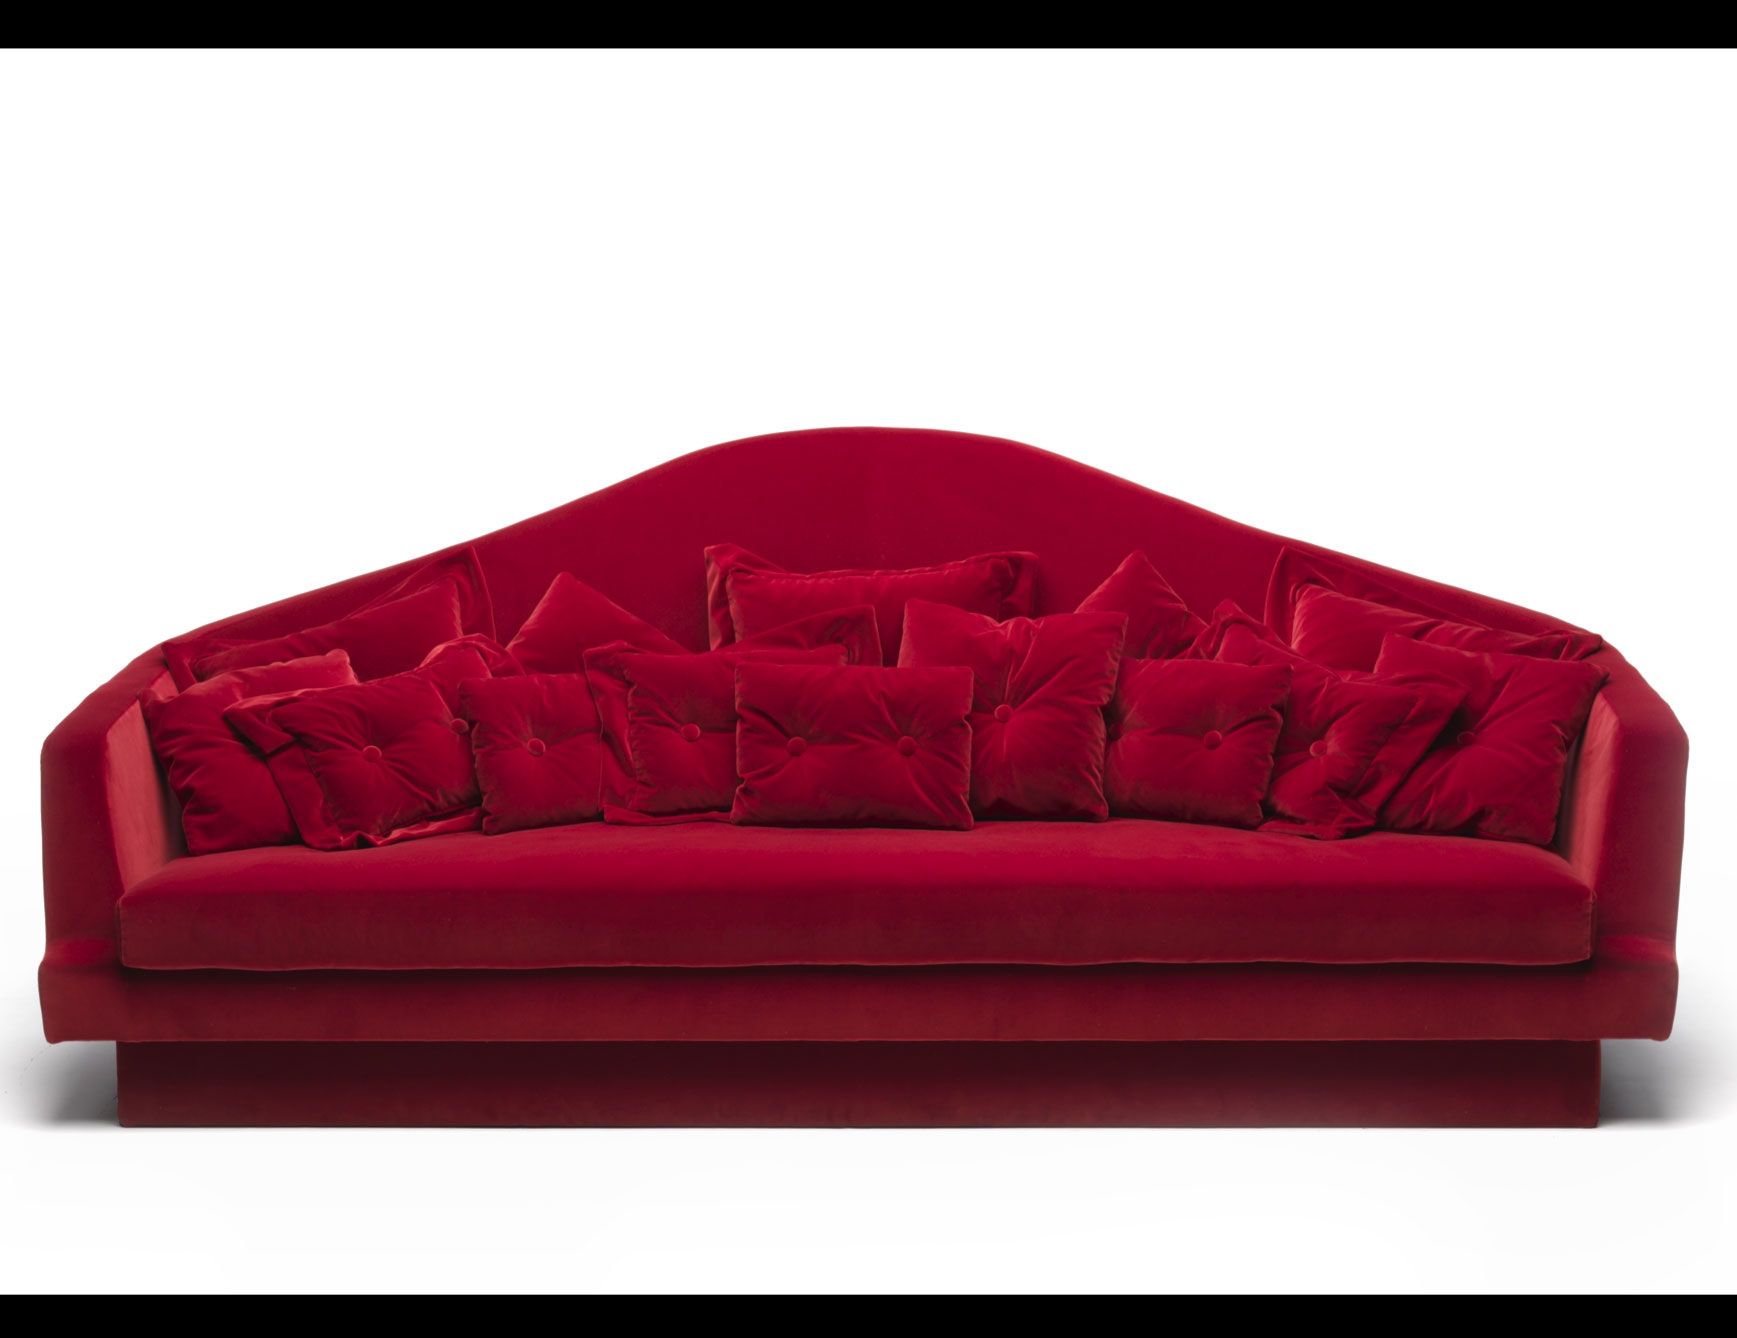 52 Red Sofas Reclining Sofas For Sale Cheap Red Leather Intended For Red Sofa Chairs (View 10 of 15)